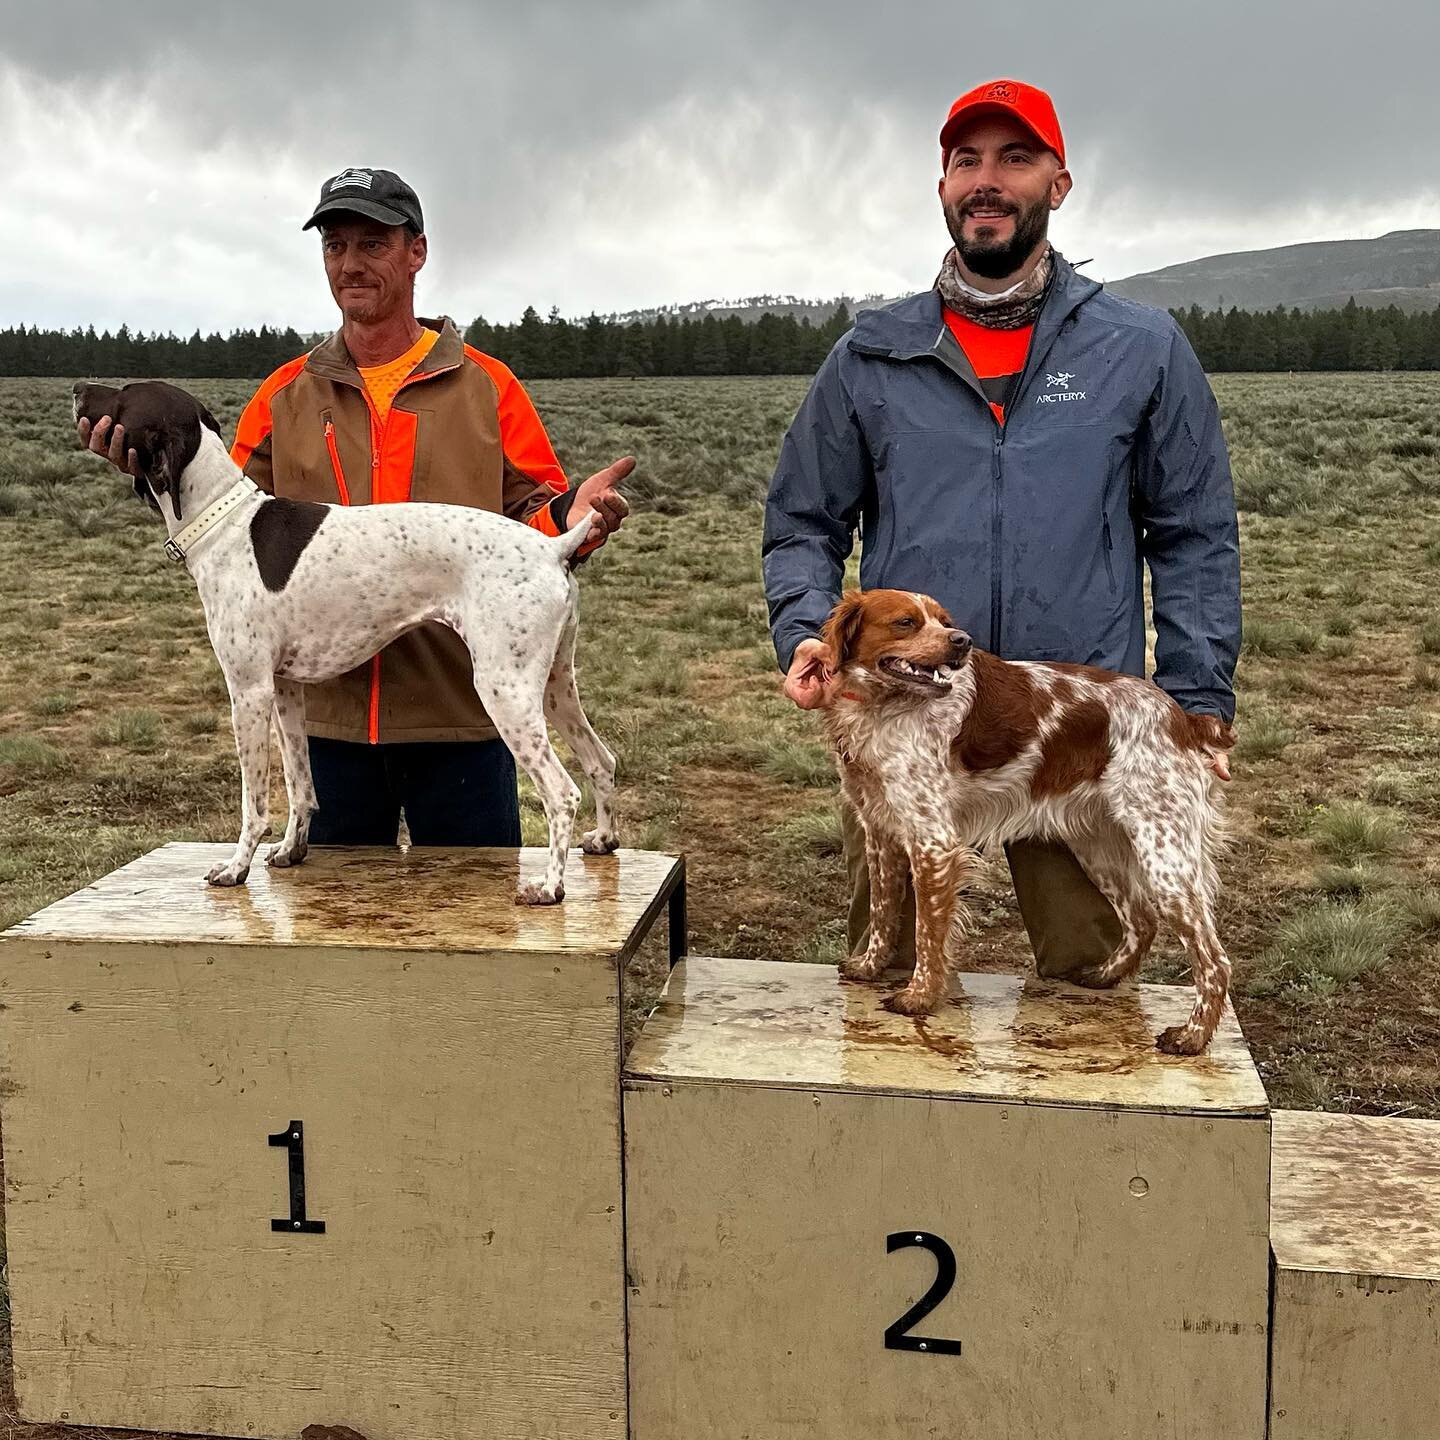 Throwing it down for all the little dogs running in a big dog world, Andros recently represented @swbretons at the AZPDC trials earning a 2nd and T4. 🏆

#swbretons #frenchbrittany #epagneulbreton #azpointingdogclub #azbirddogs #fieldtrial #birddog #